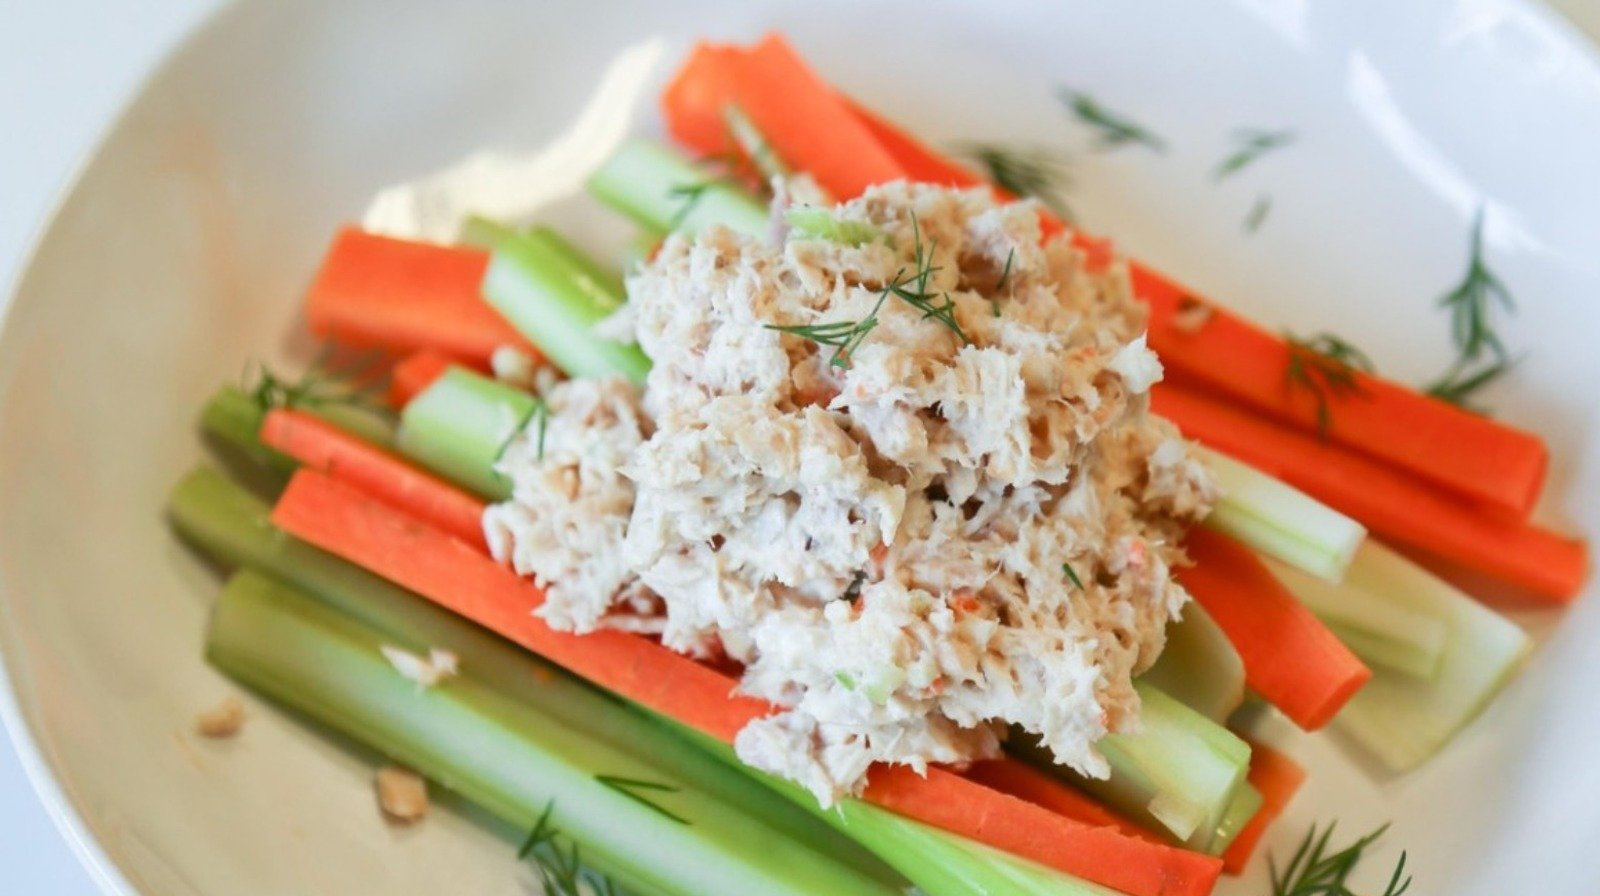 This Simple Tuna Salad Will Be Your New Go-To